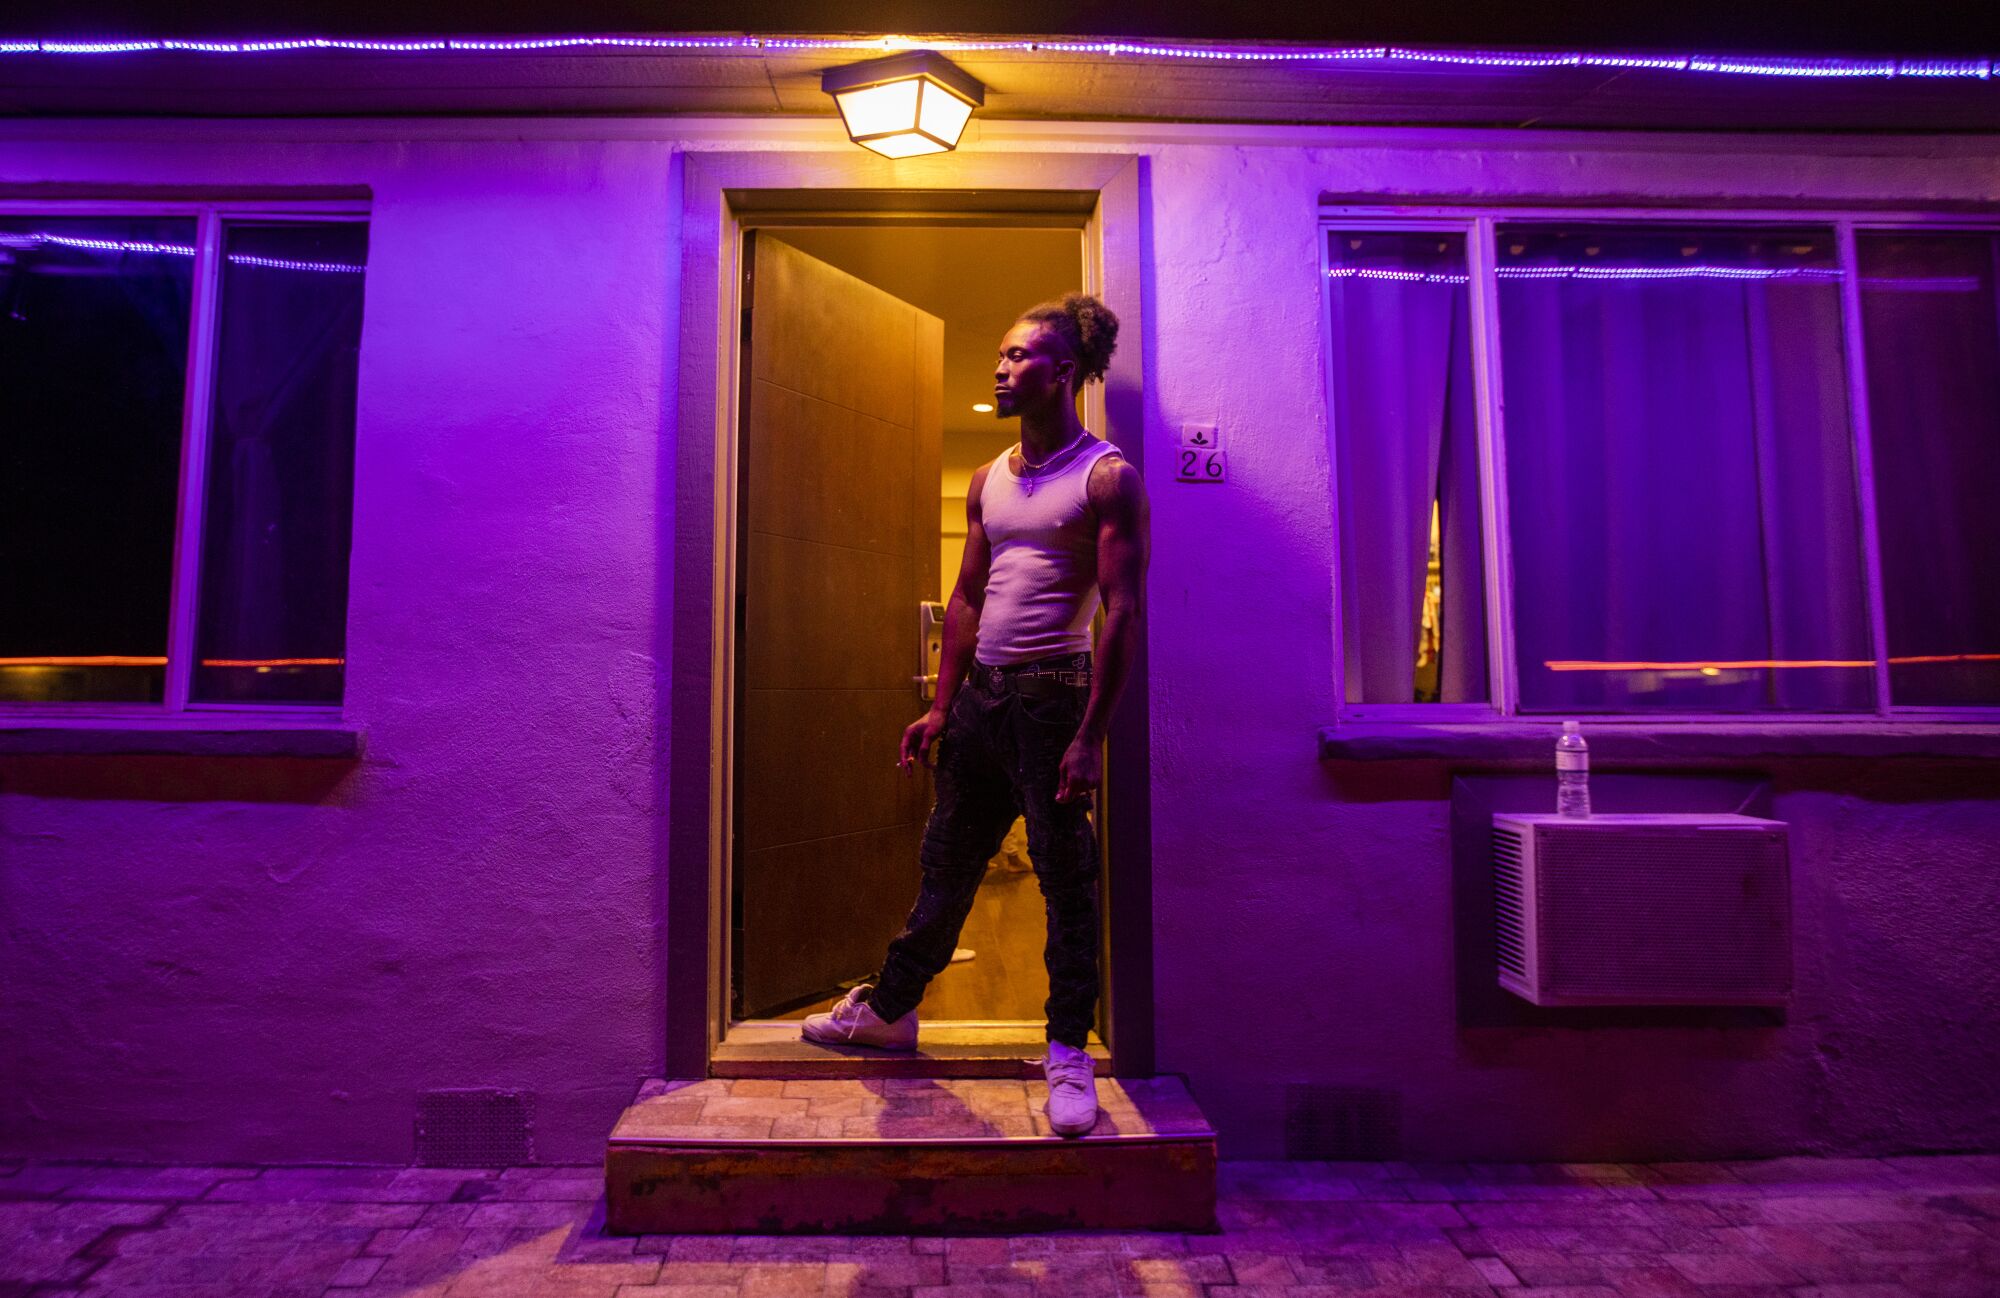 C'Tory Matthews smokes a cigarette as he stands in the door to his room at a motel.